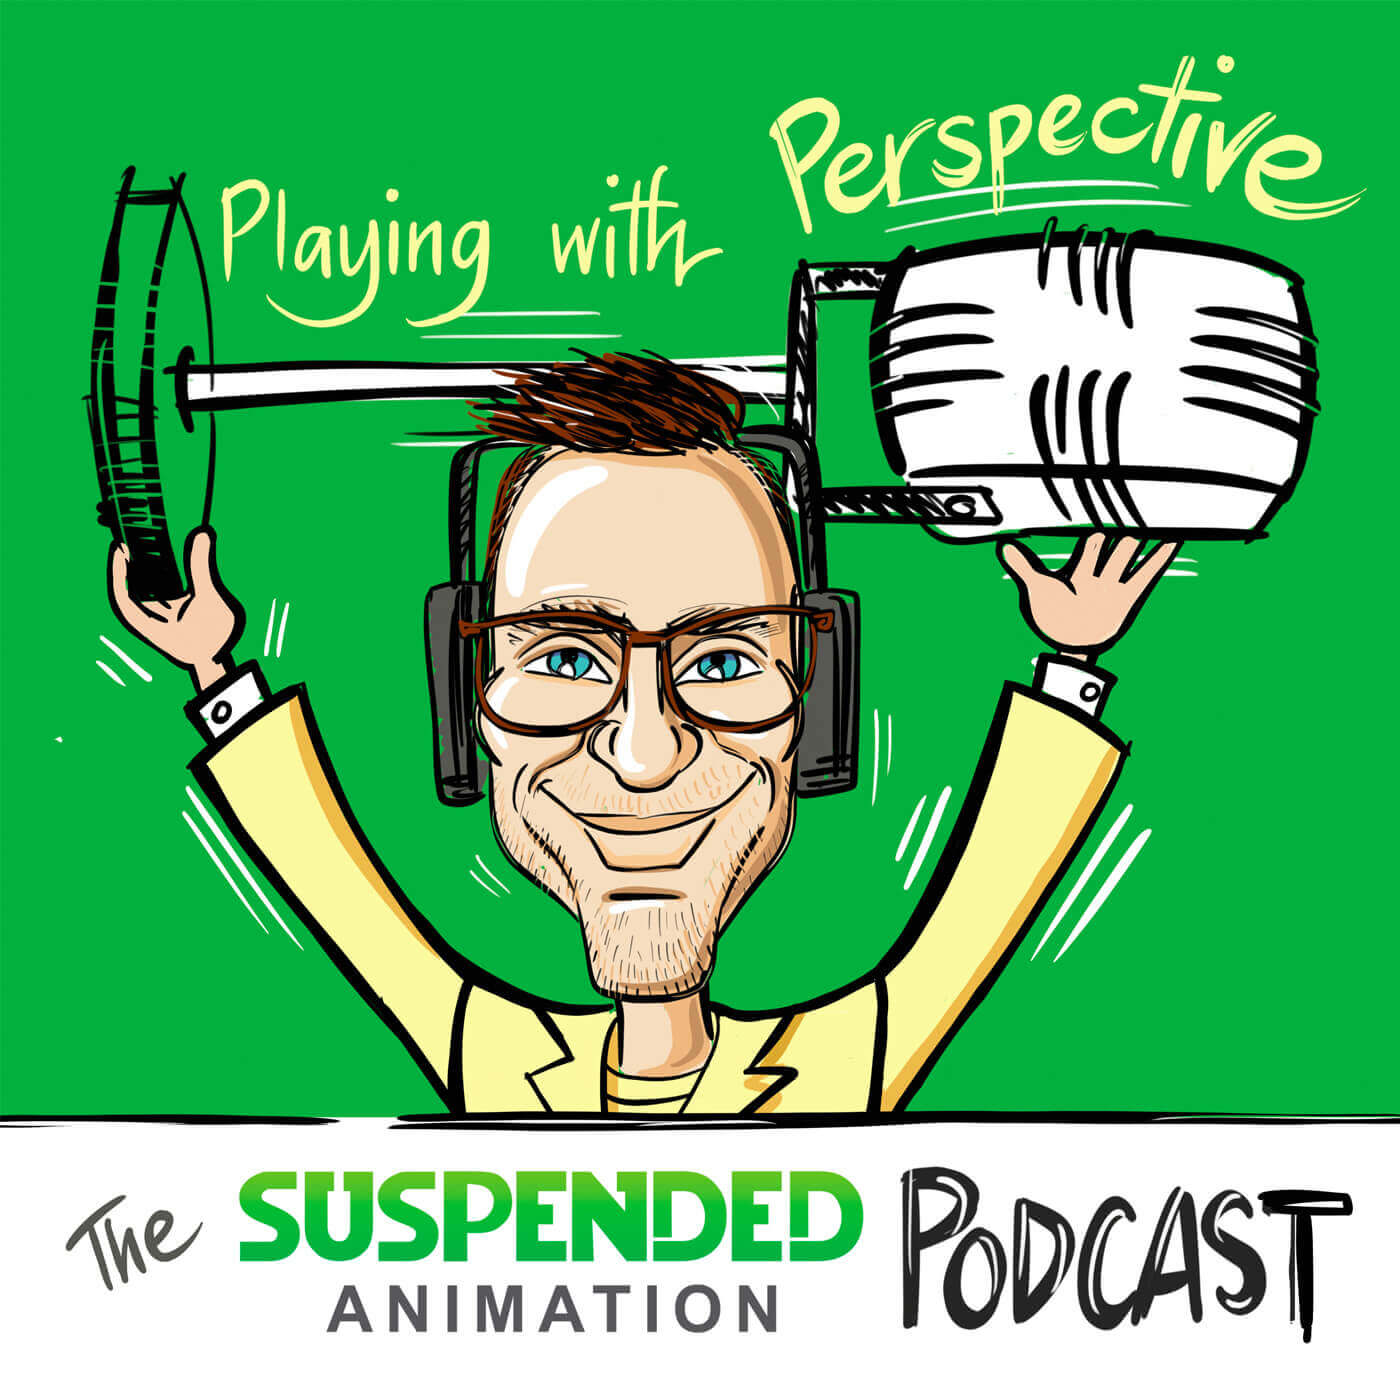 Suspended Animation Podcast with Darren Saul